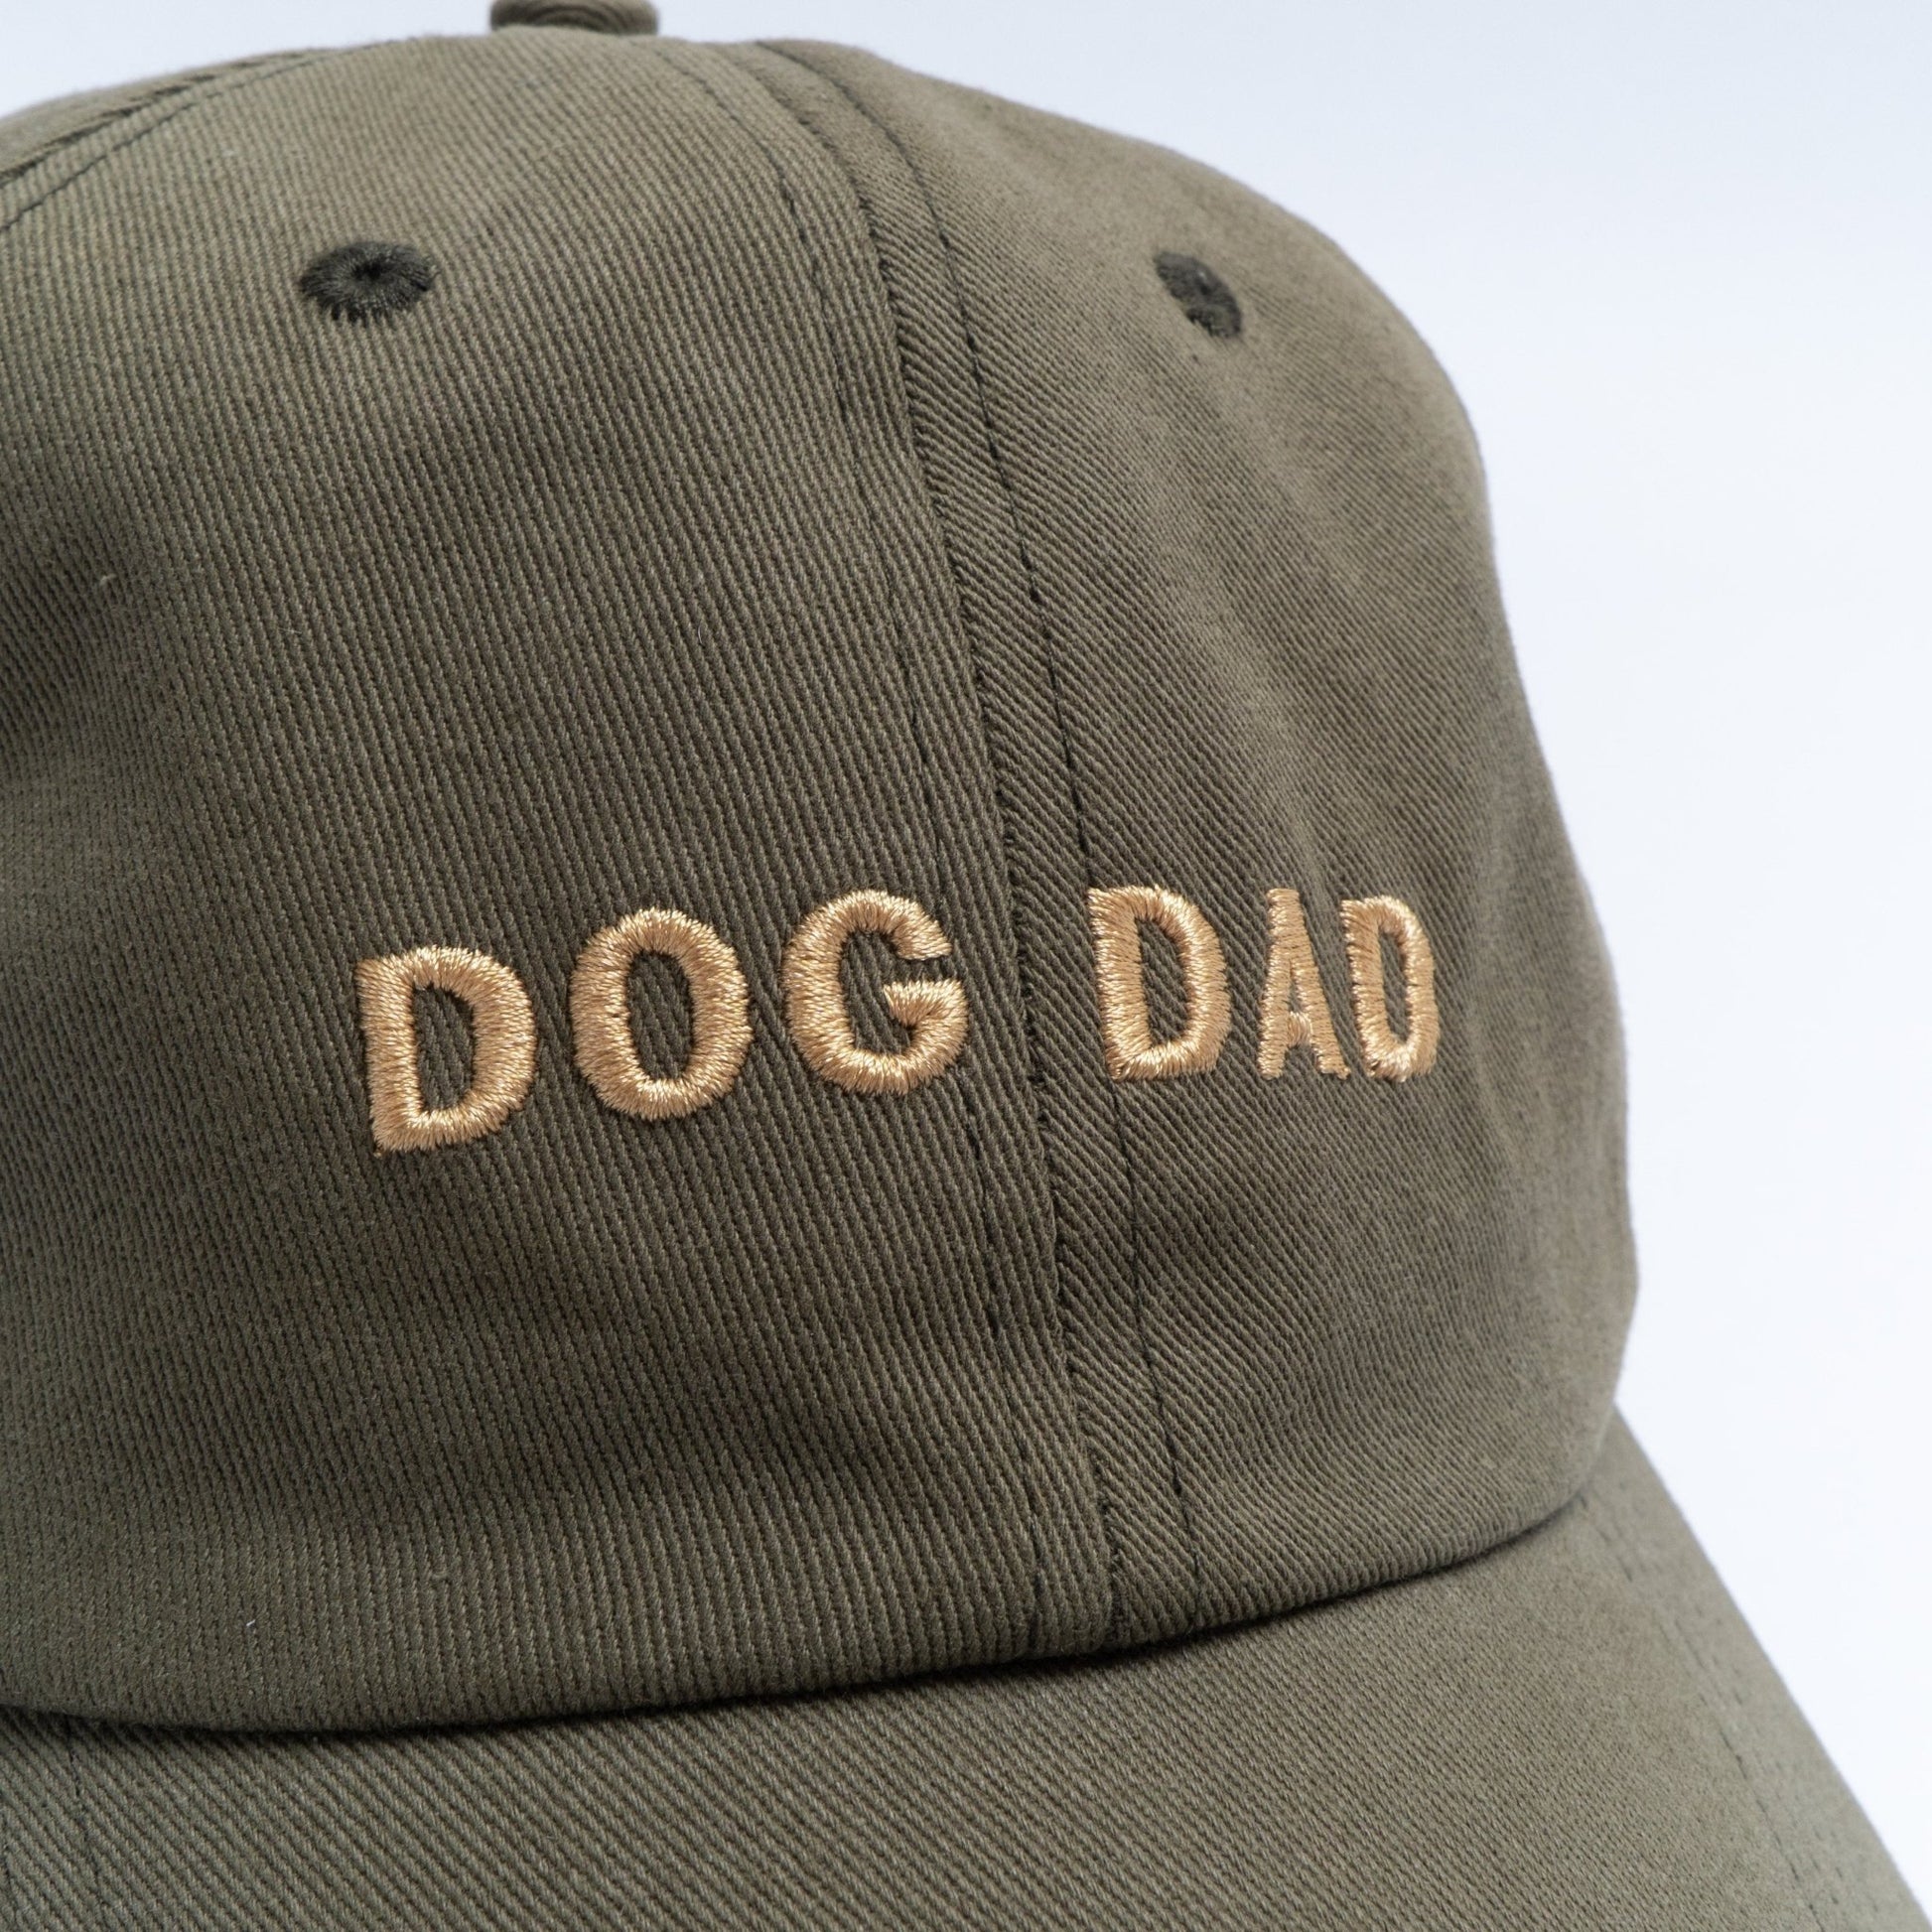 green dog dad hat by Lucy & Co.